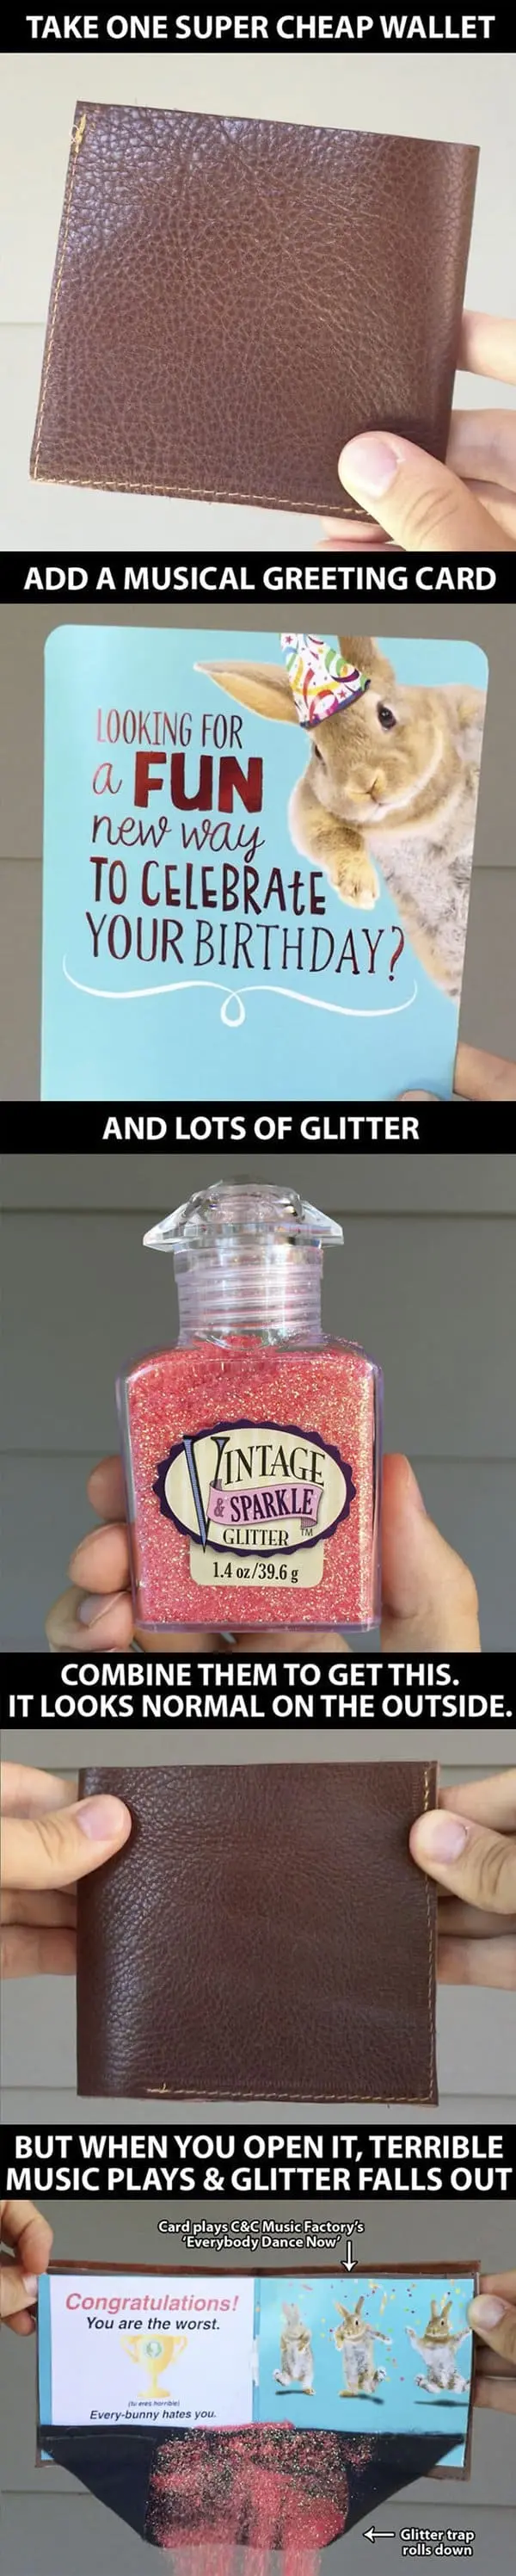 People That Took Trolling To The Next Level glitter wallet trap